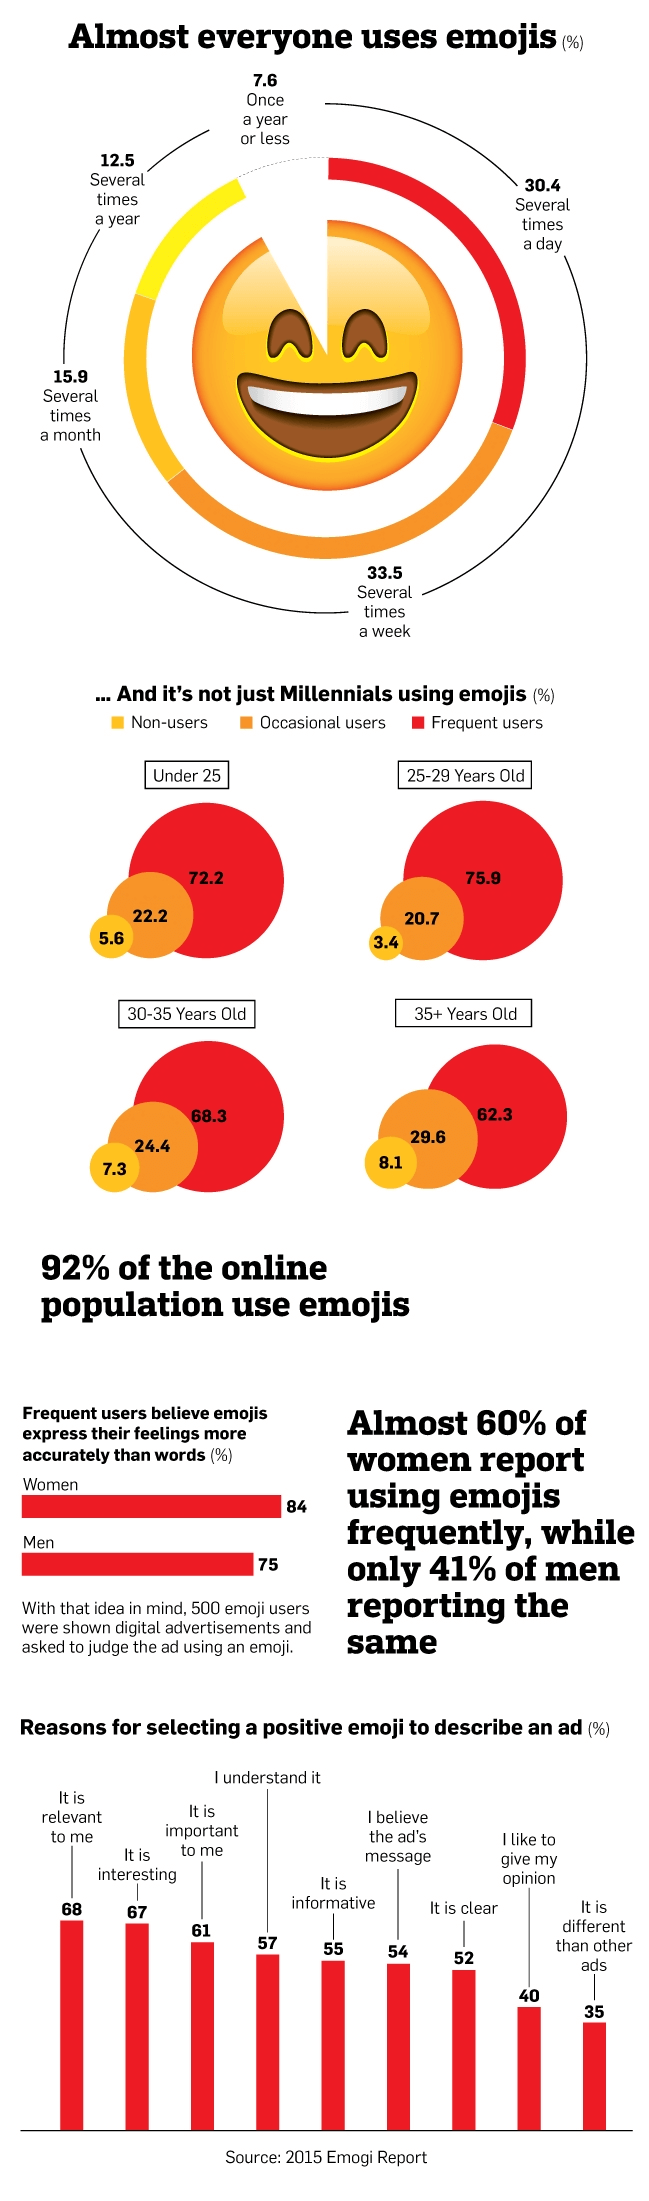 In a fast-moving digital world, we want to say more with less, while still conveying authenticity. Emojis are the answer to this problem.